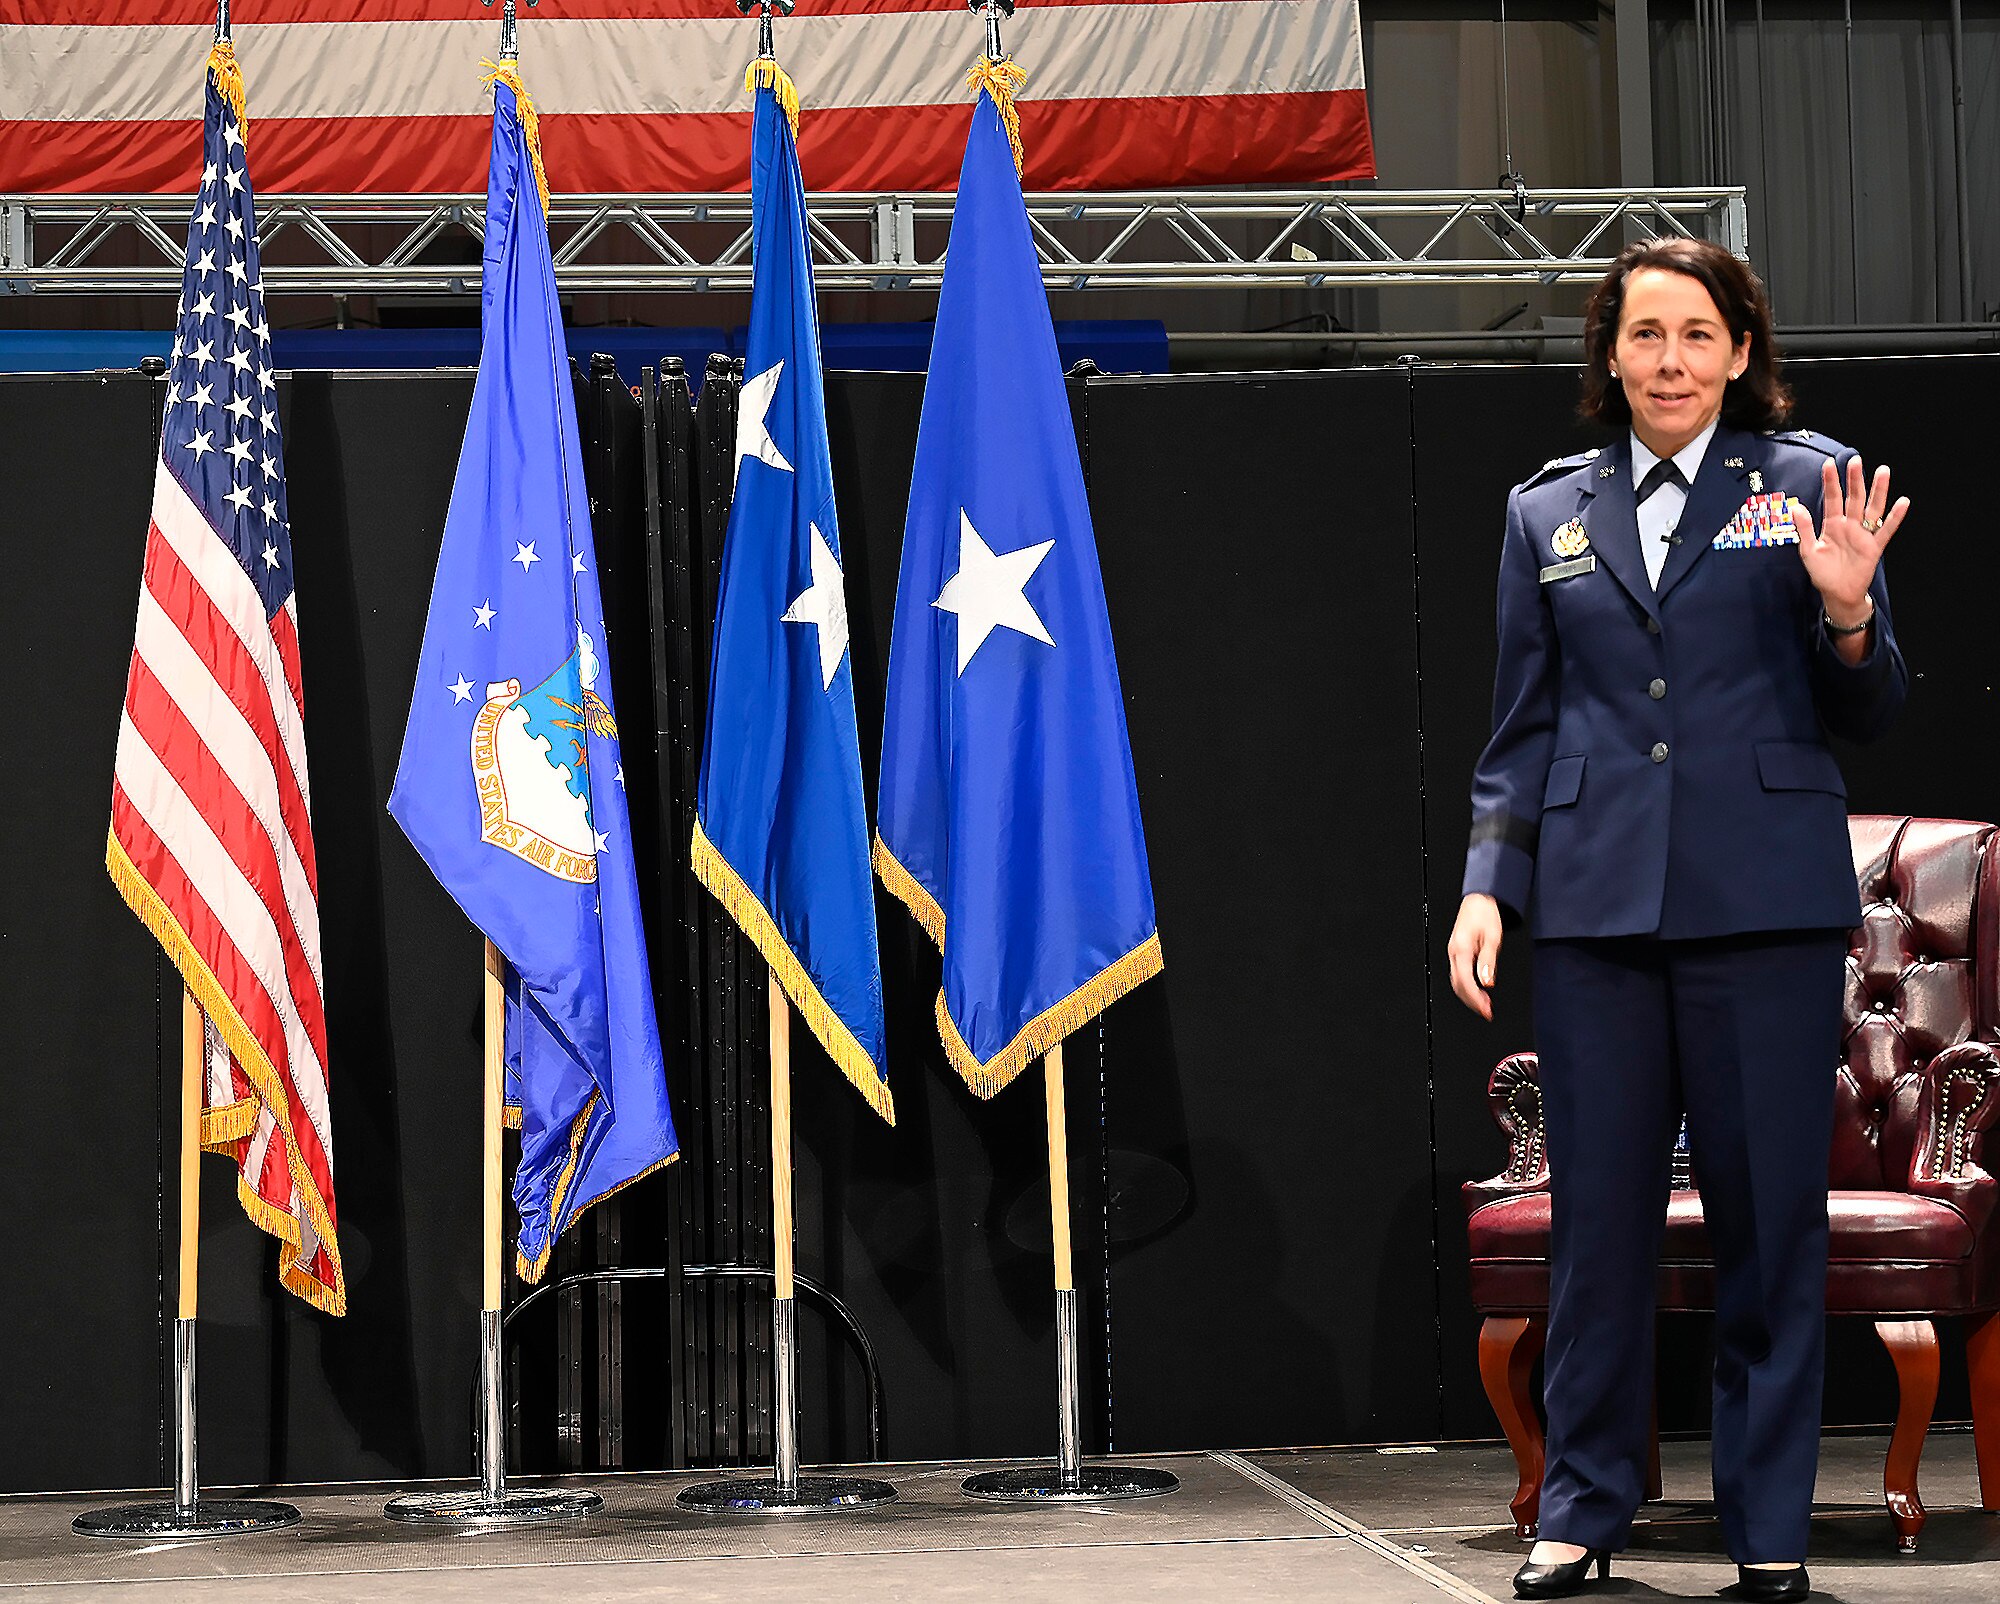 Brig. Gen. Jeannine Ryder expresses her gratitude towards her friends, family and coworkers, Aug. 3, following her promotion to general officer at the National Museum of the United States Air Force, Wright-Patterson Air Force Base, Ohio. (photo by Darrius Parker)